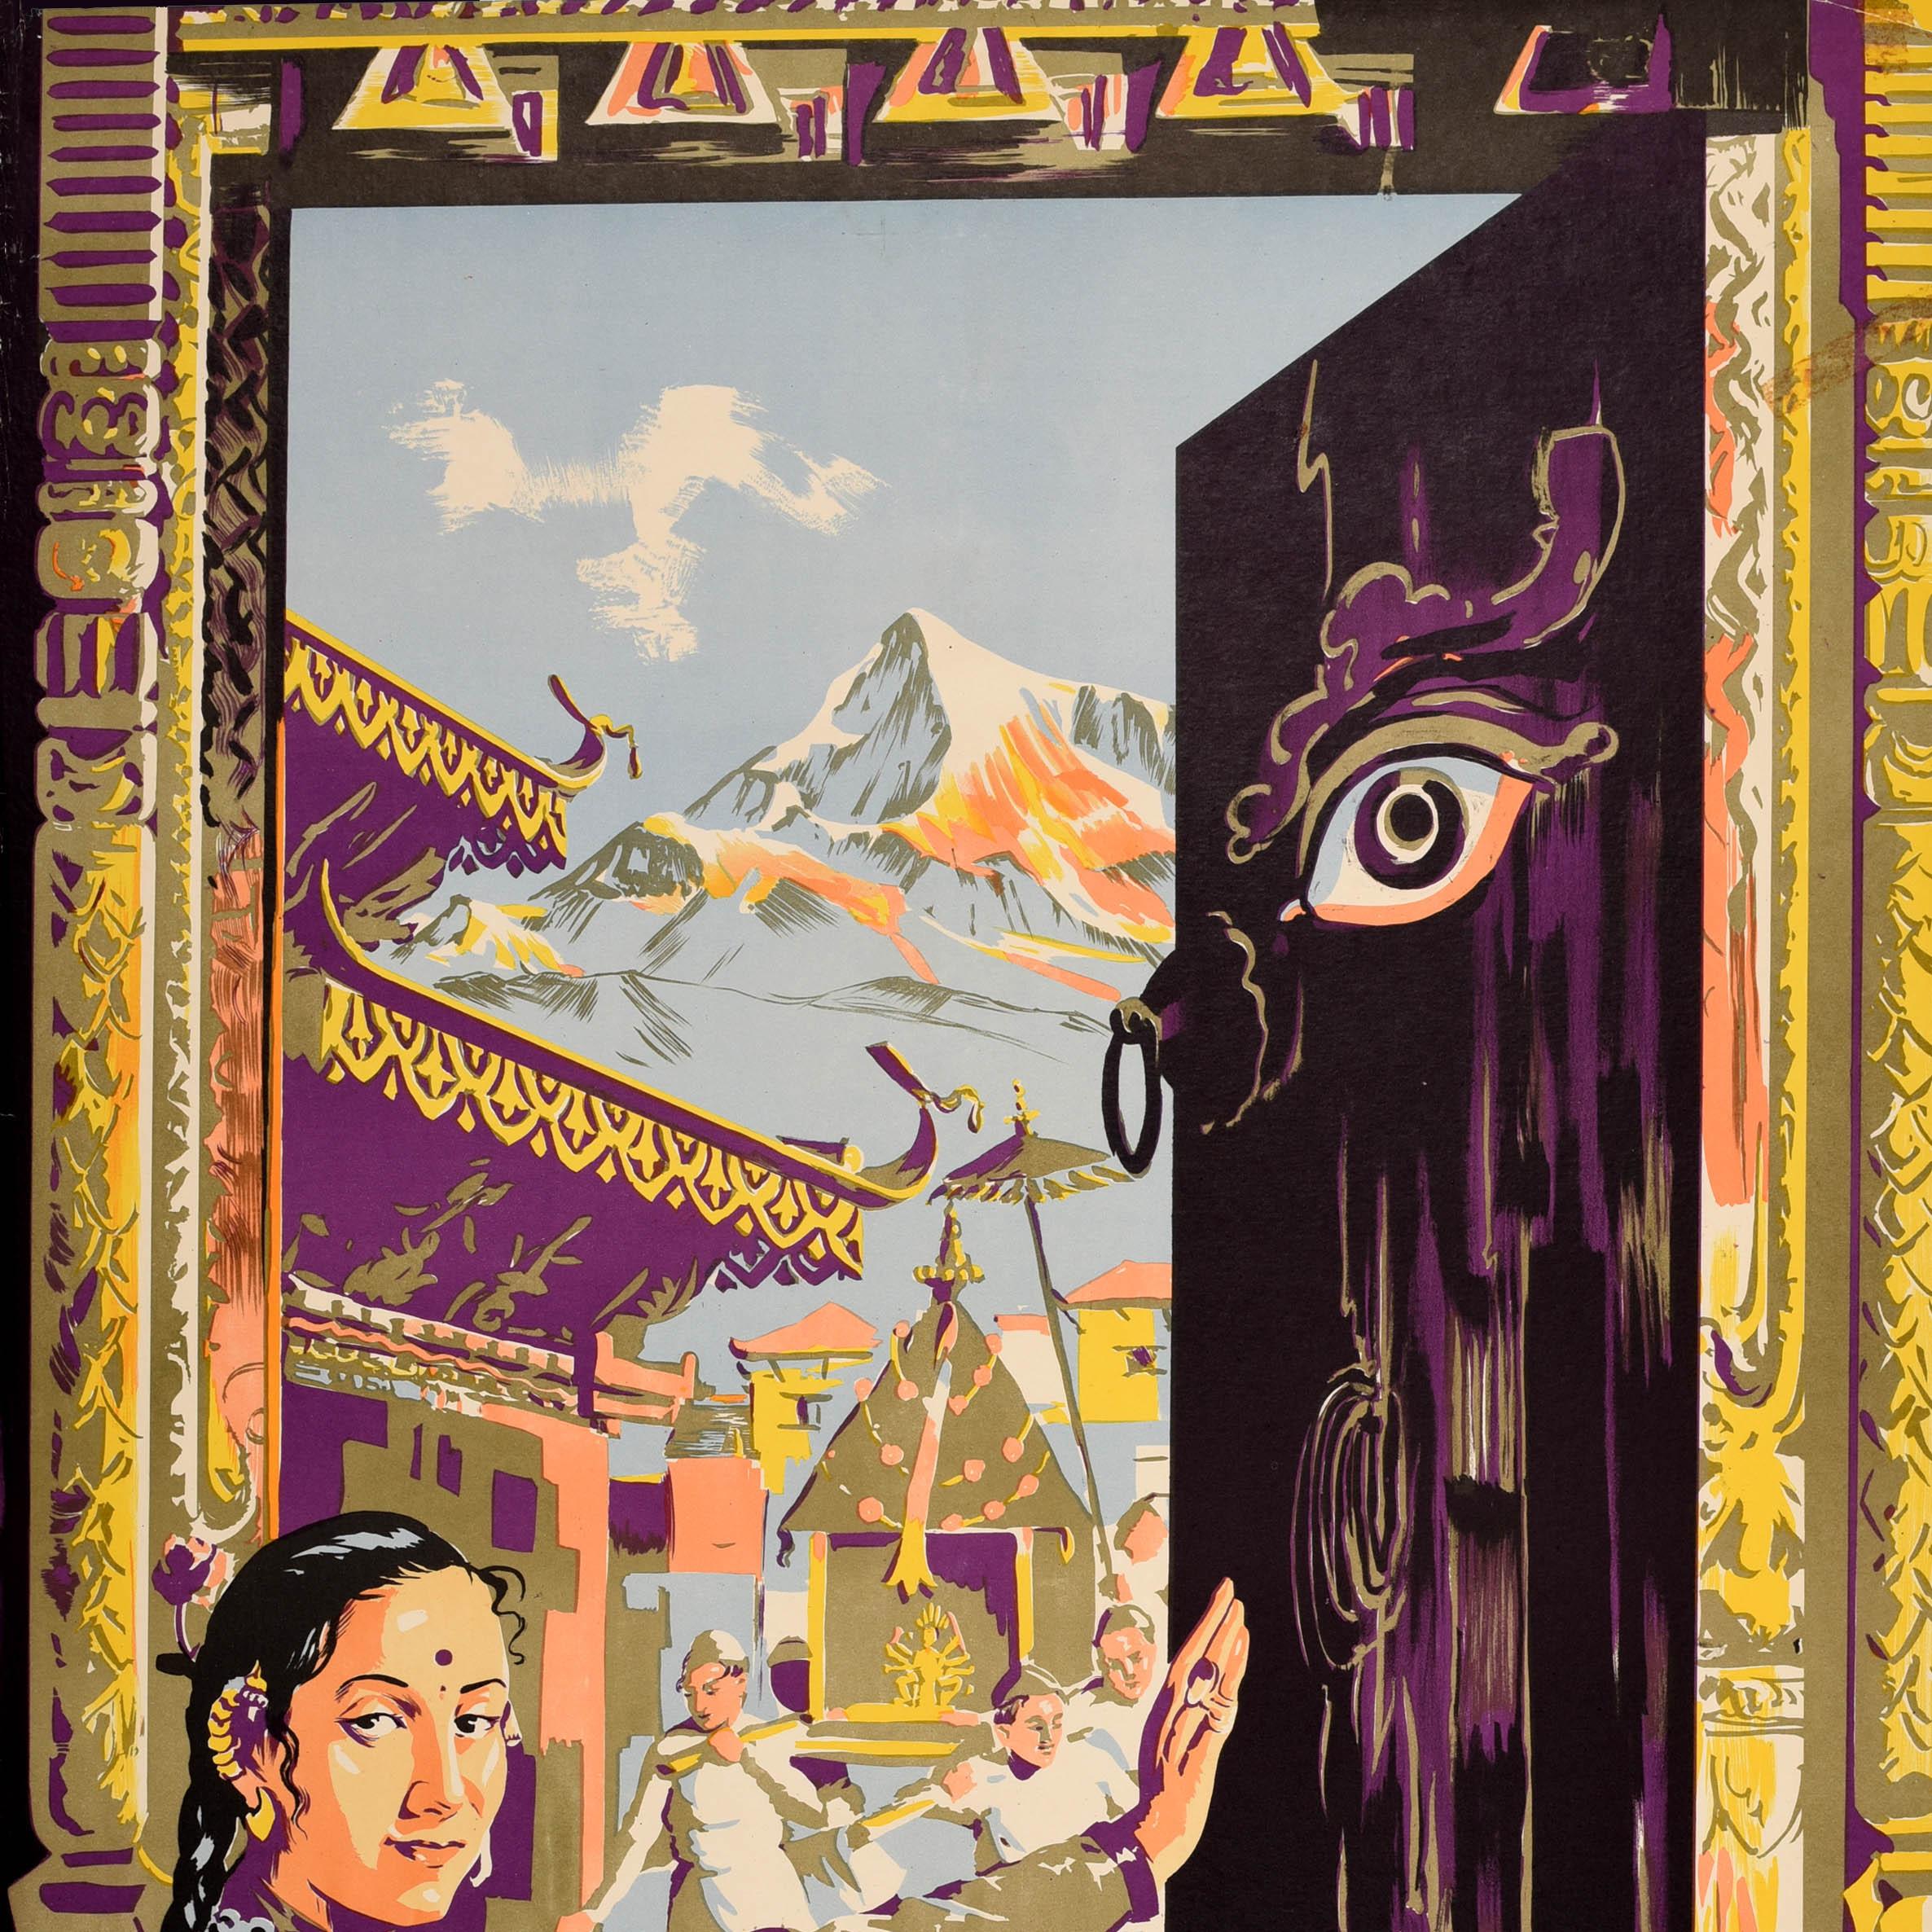 Original vintage Asia travel poster - Visit Kathmandu - featuring colourful artwork of a lady holding a door open for the viewer to reveal a procession walking in front of a Buddhist temple with snow topped mountains in the background, an eye